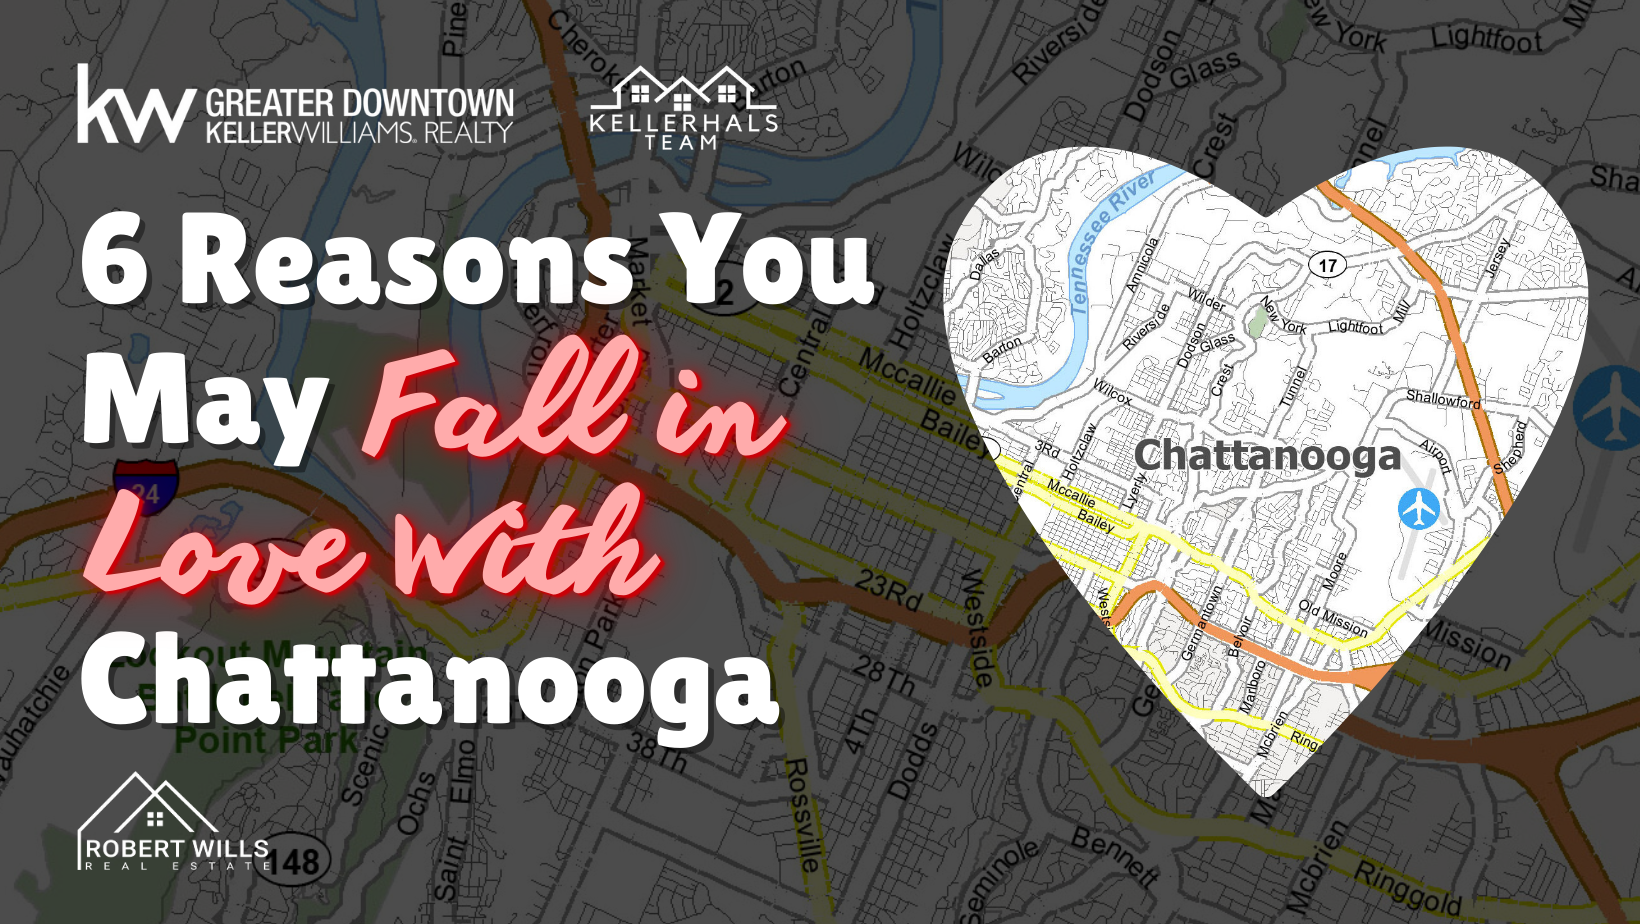 6 Reasons you may Fall in Love with Chattanooga